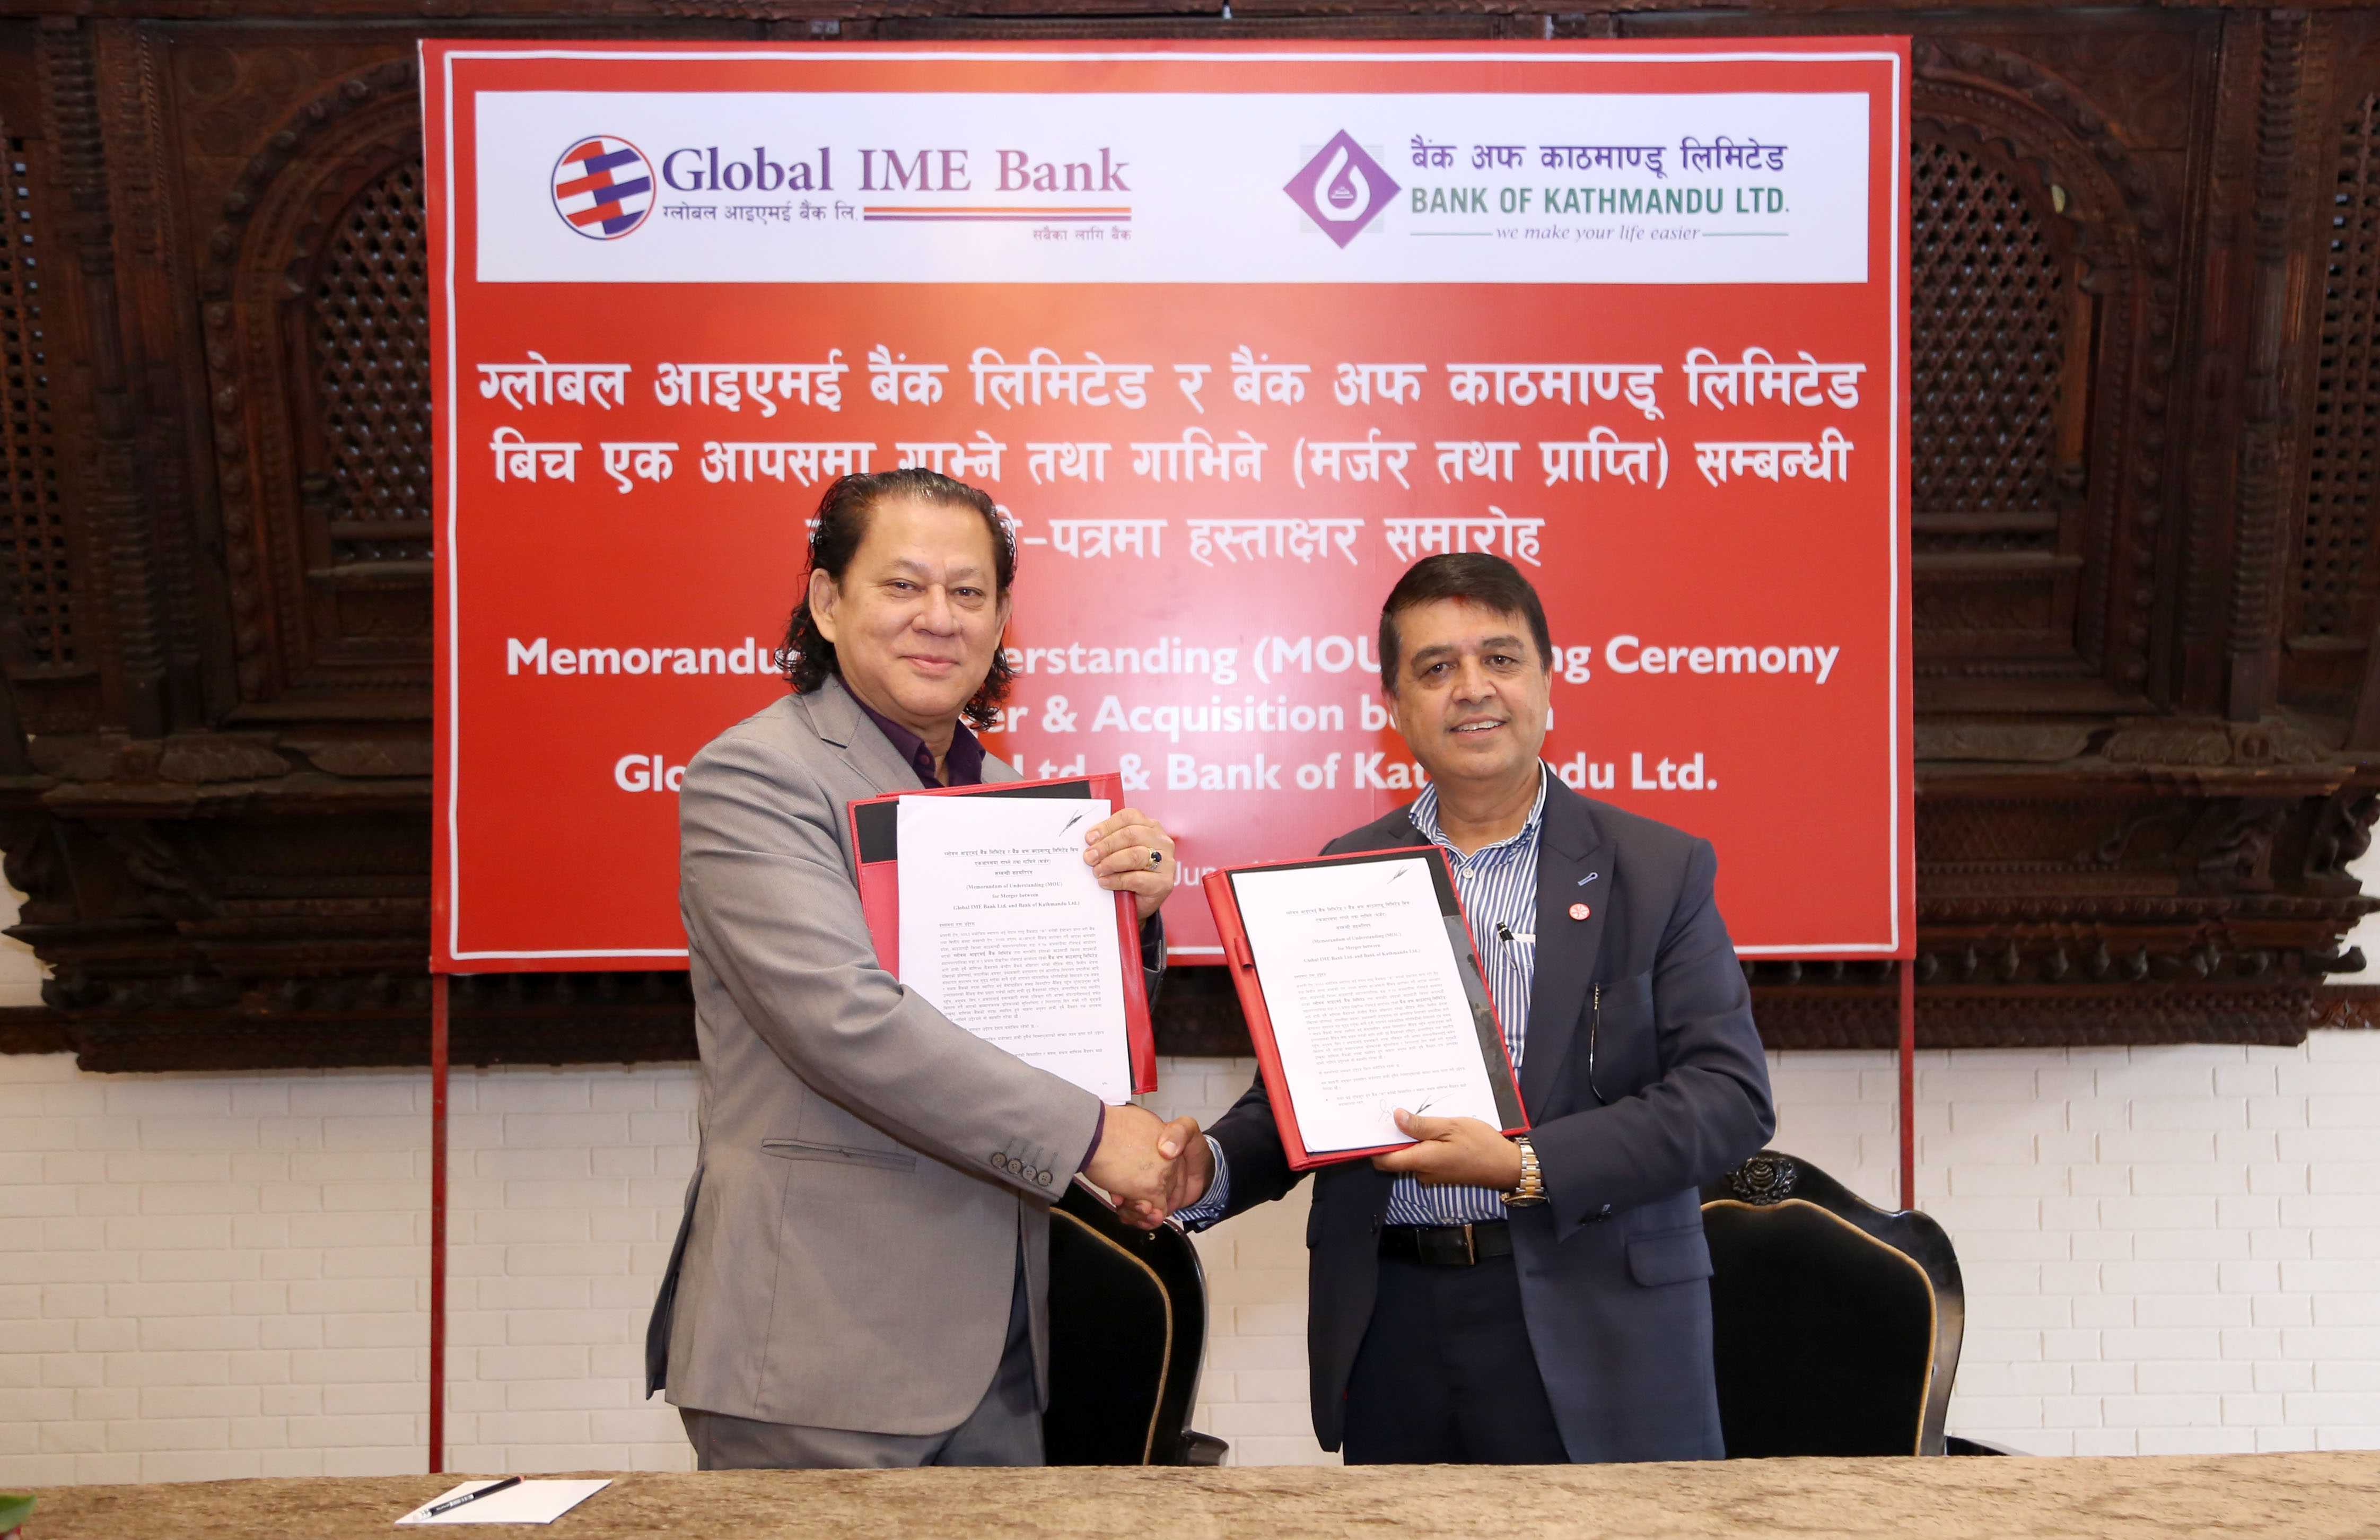 Global IME Bank and Bank of Kathmandu seek NRB’s approval to conclude merger